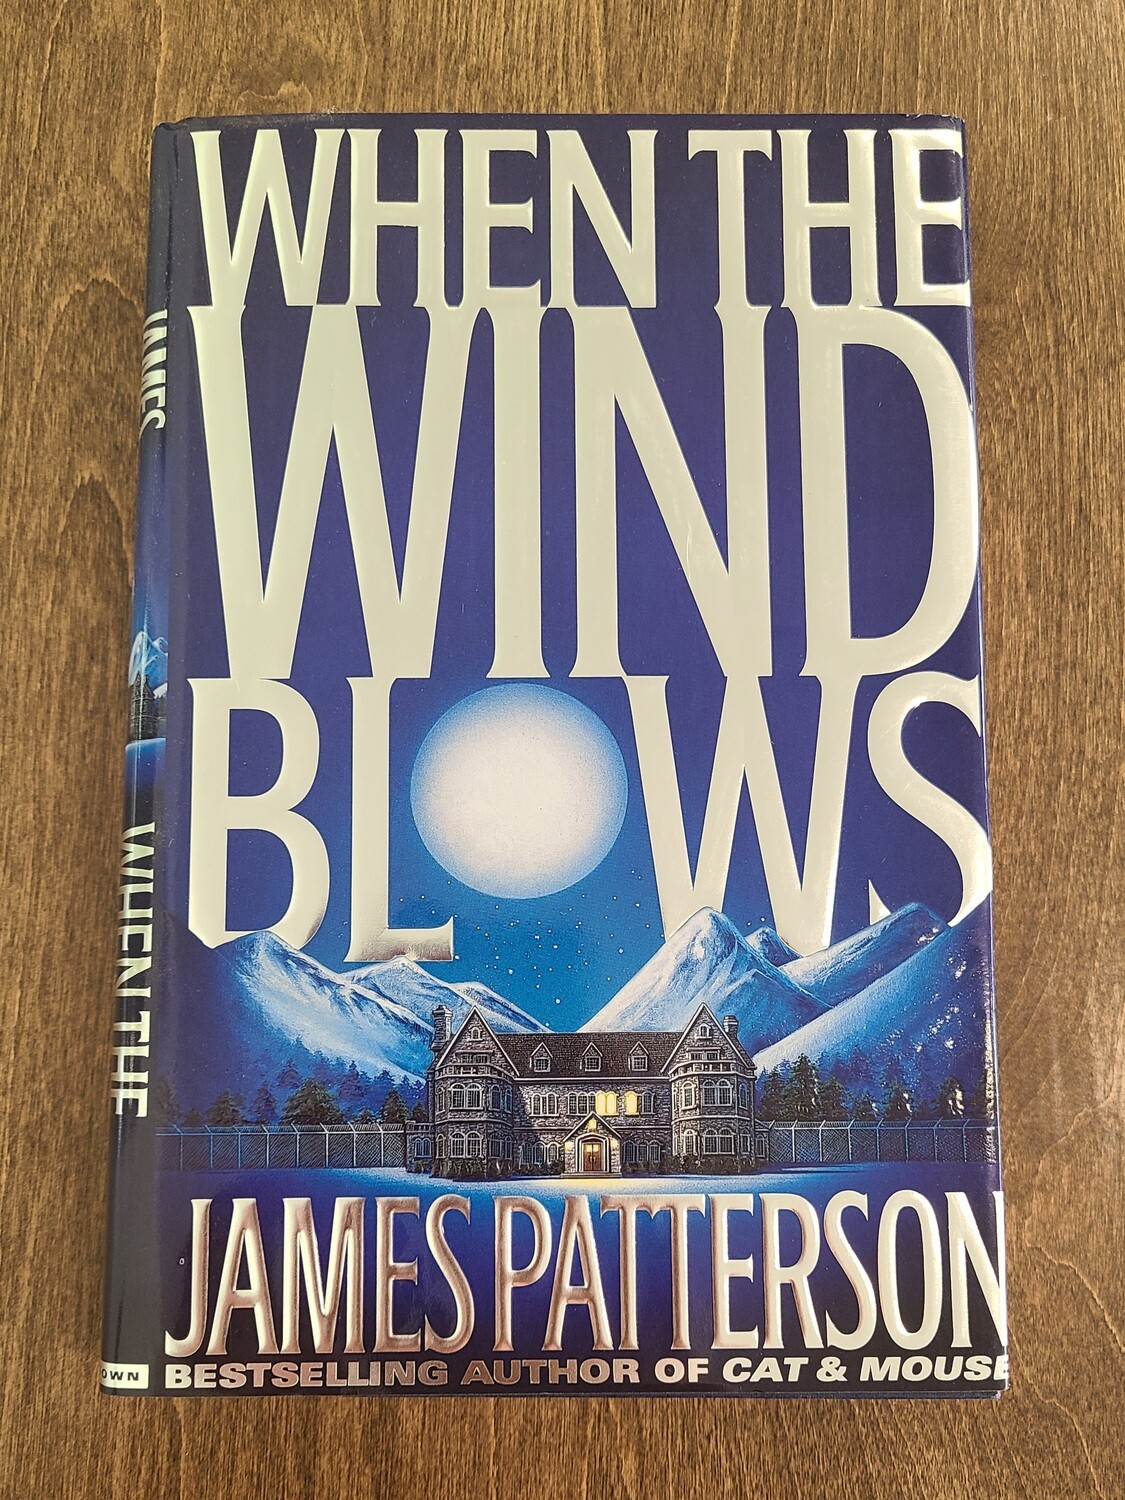 When the Wind Blows by James Patterson - Hardcover